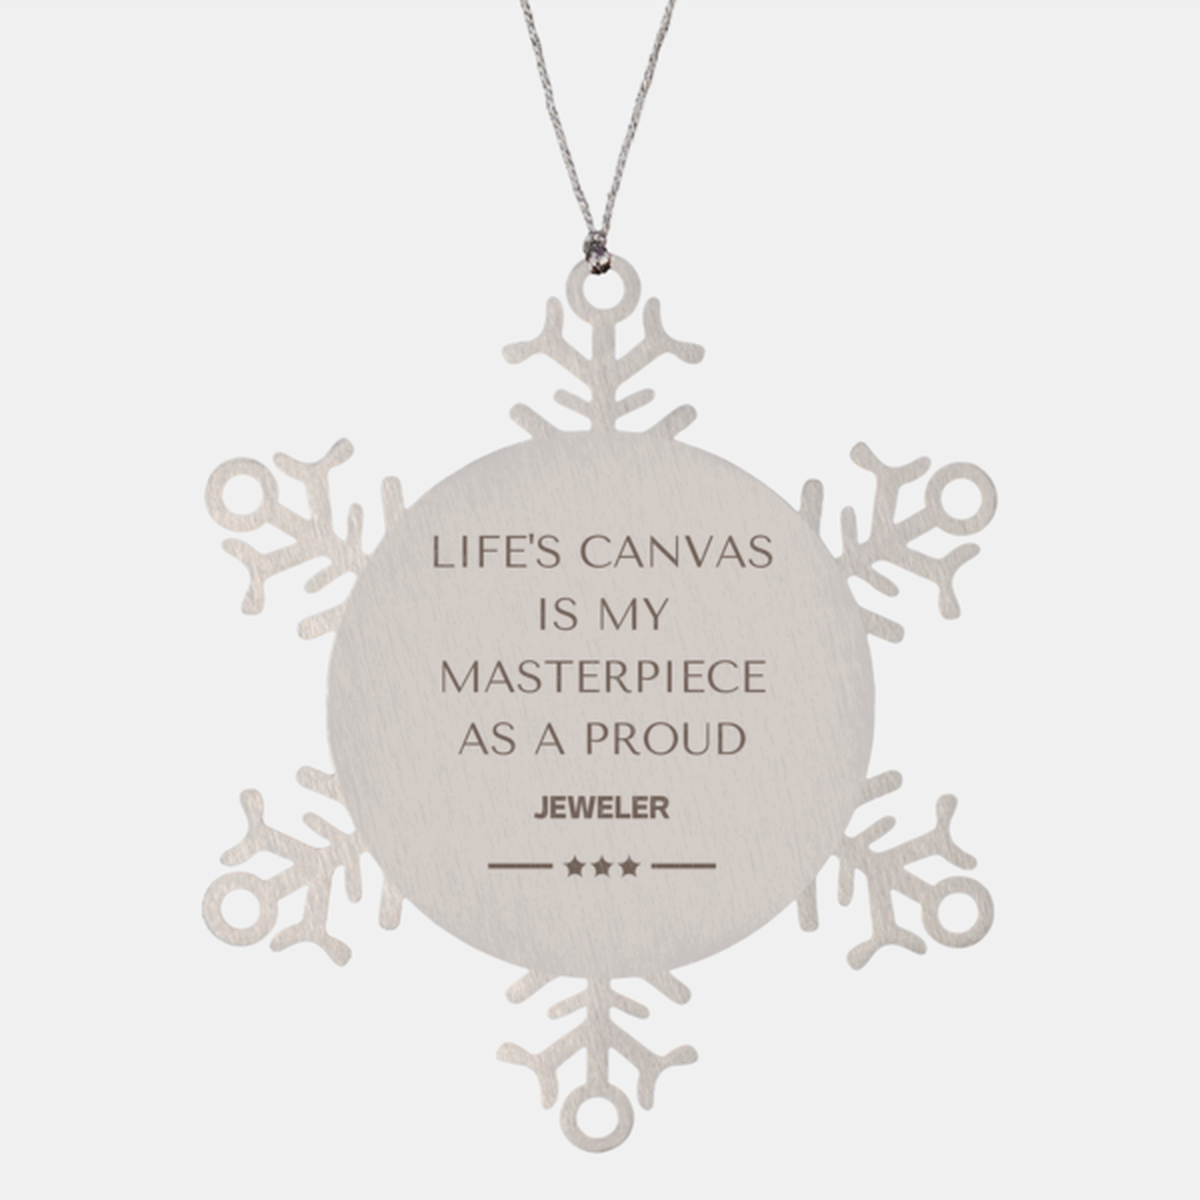 Proud Jeweler Gifts, Life's canvas is my masterpiece, Epic Birthday Christmas Unique Snowflake Ornament For Jeweler, Coworkers, Men, Women, Friends